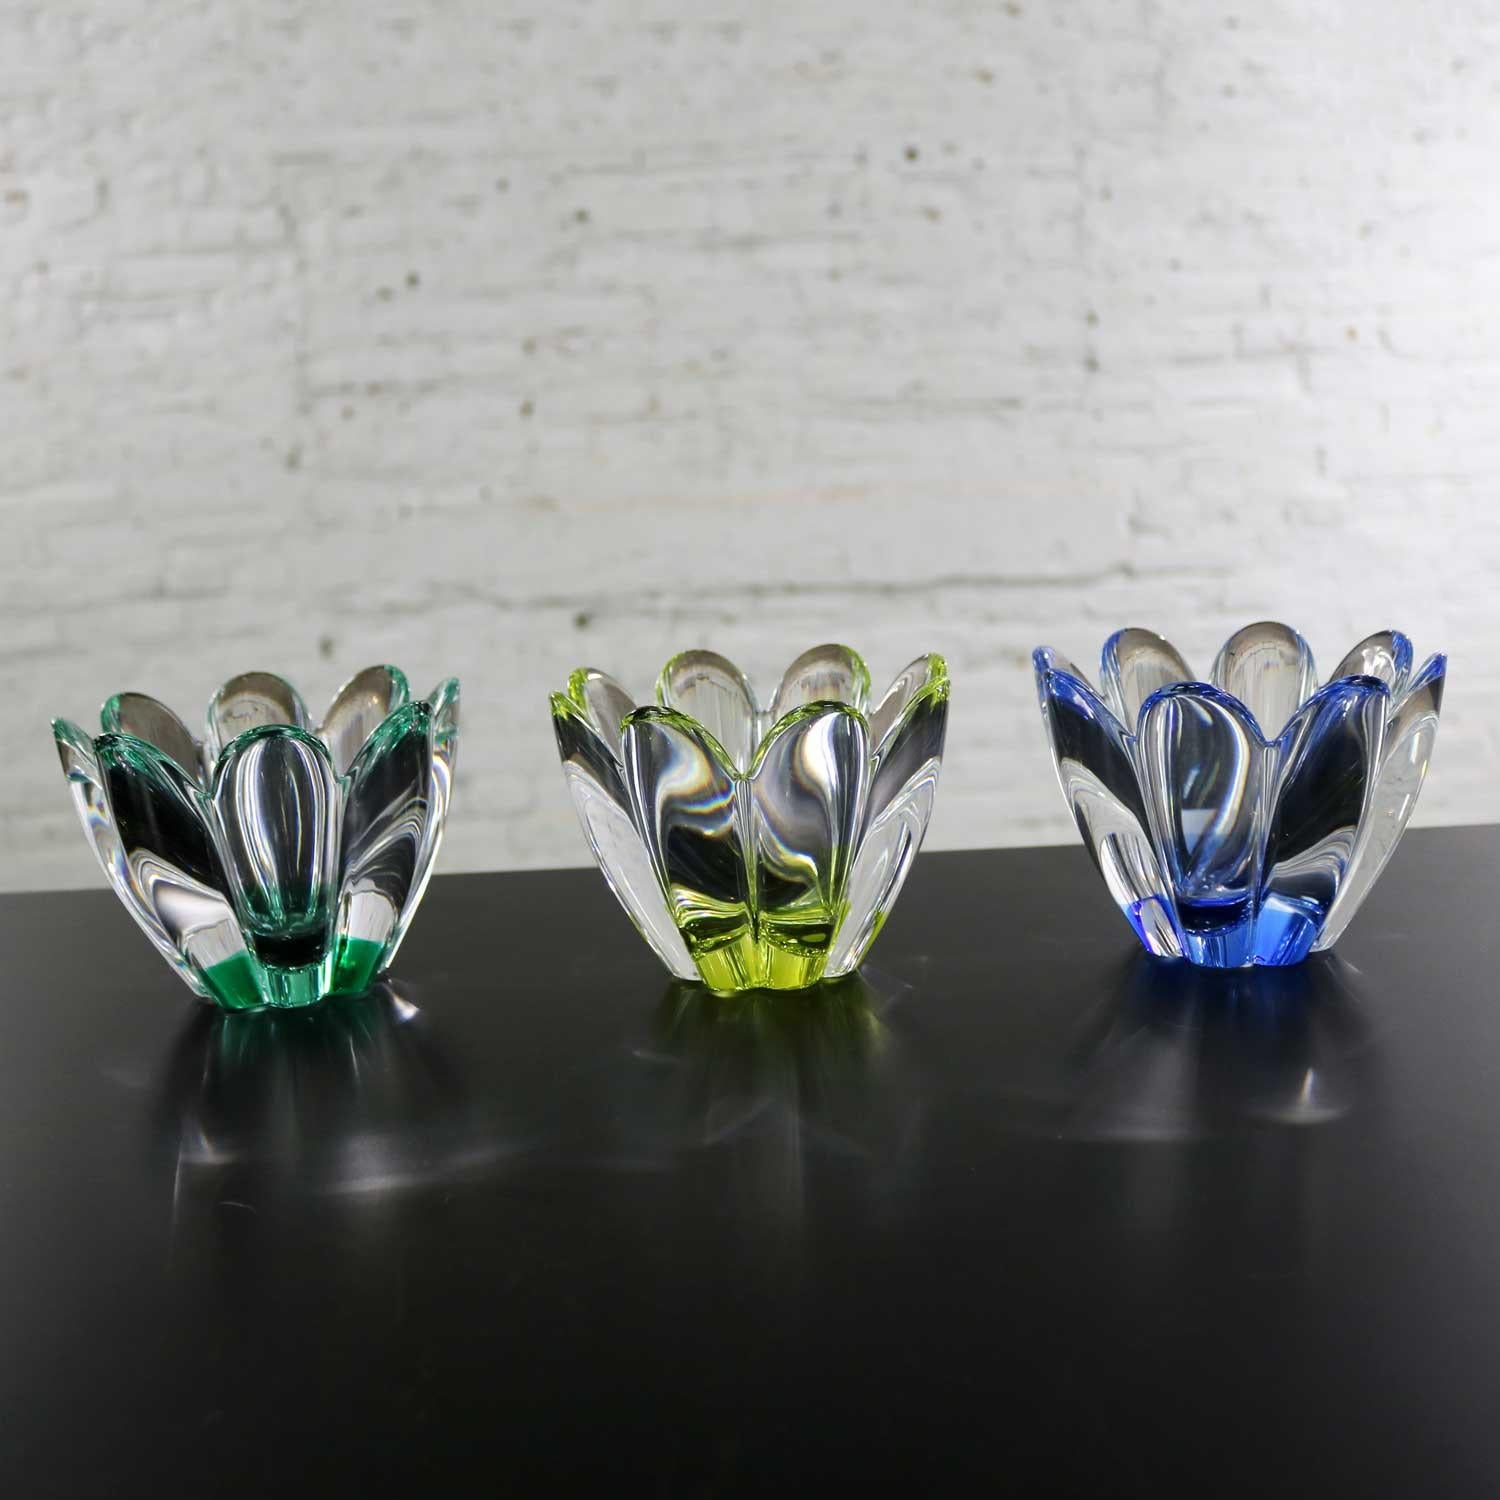 Awesome set of 3 vintage Orrefors Sweden glass Mayflower bowls designed by Jan Johansson. There is one each of yellow, green, and blue. These are in excellent new condition signed and still have their original box and tags. We have priced these as a